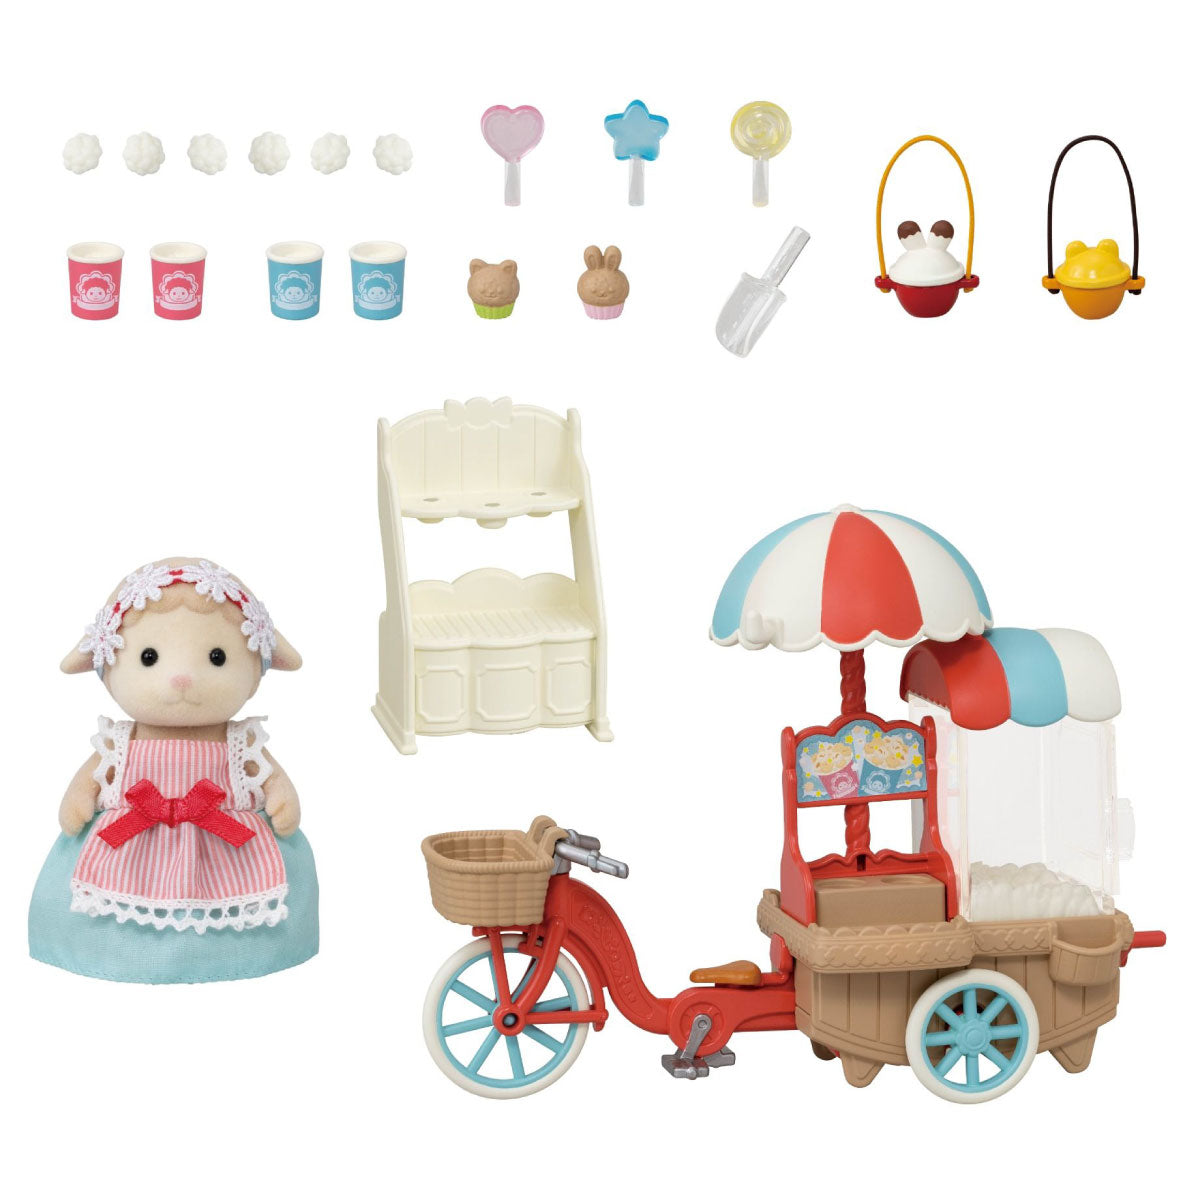 Calico Critters Popcorn Delivery Trike